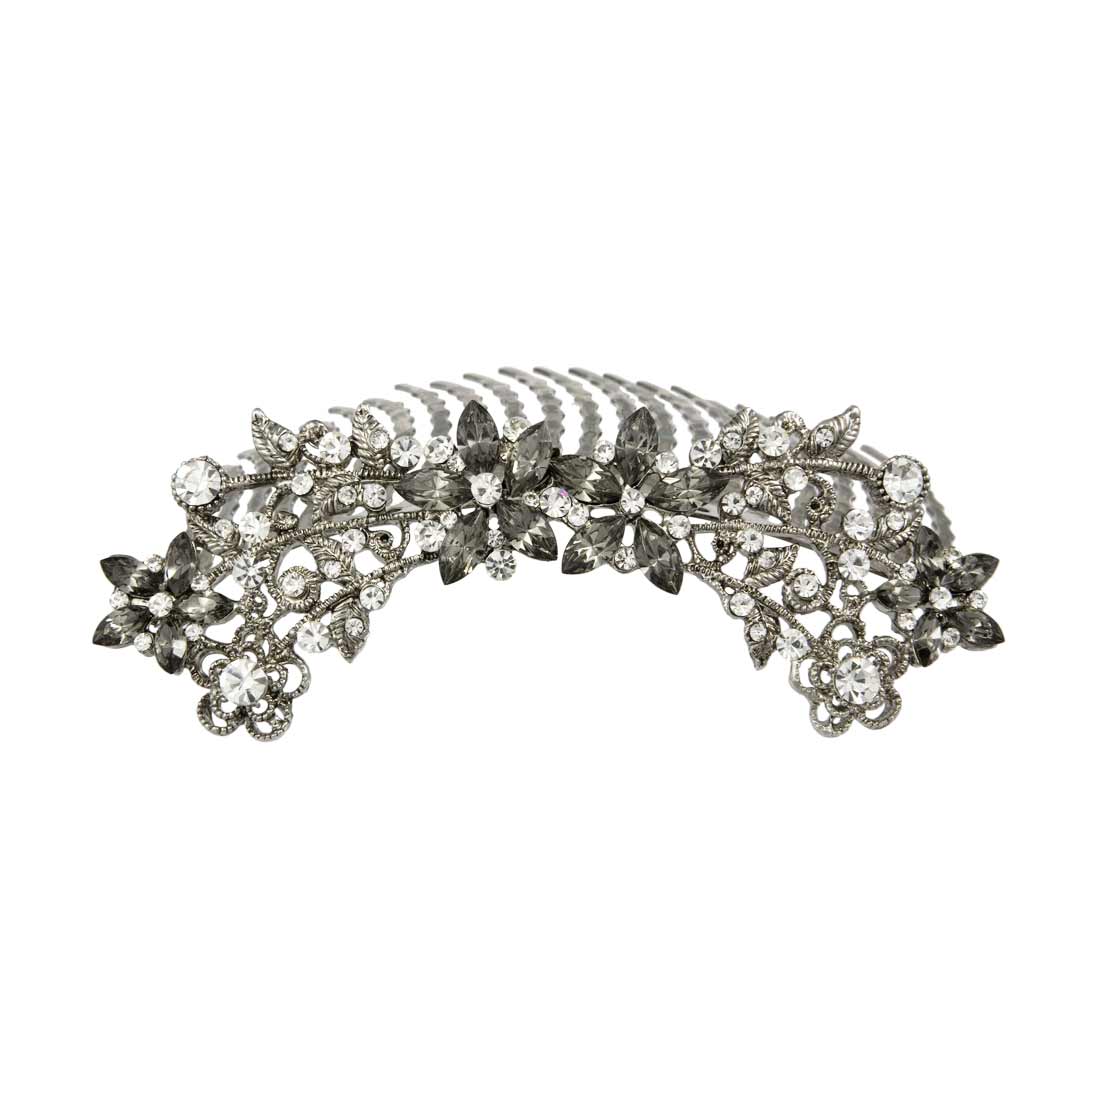 Vintage Romance Large Grey Crystal Occasion Decorative Hair Comb